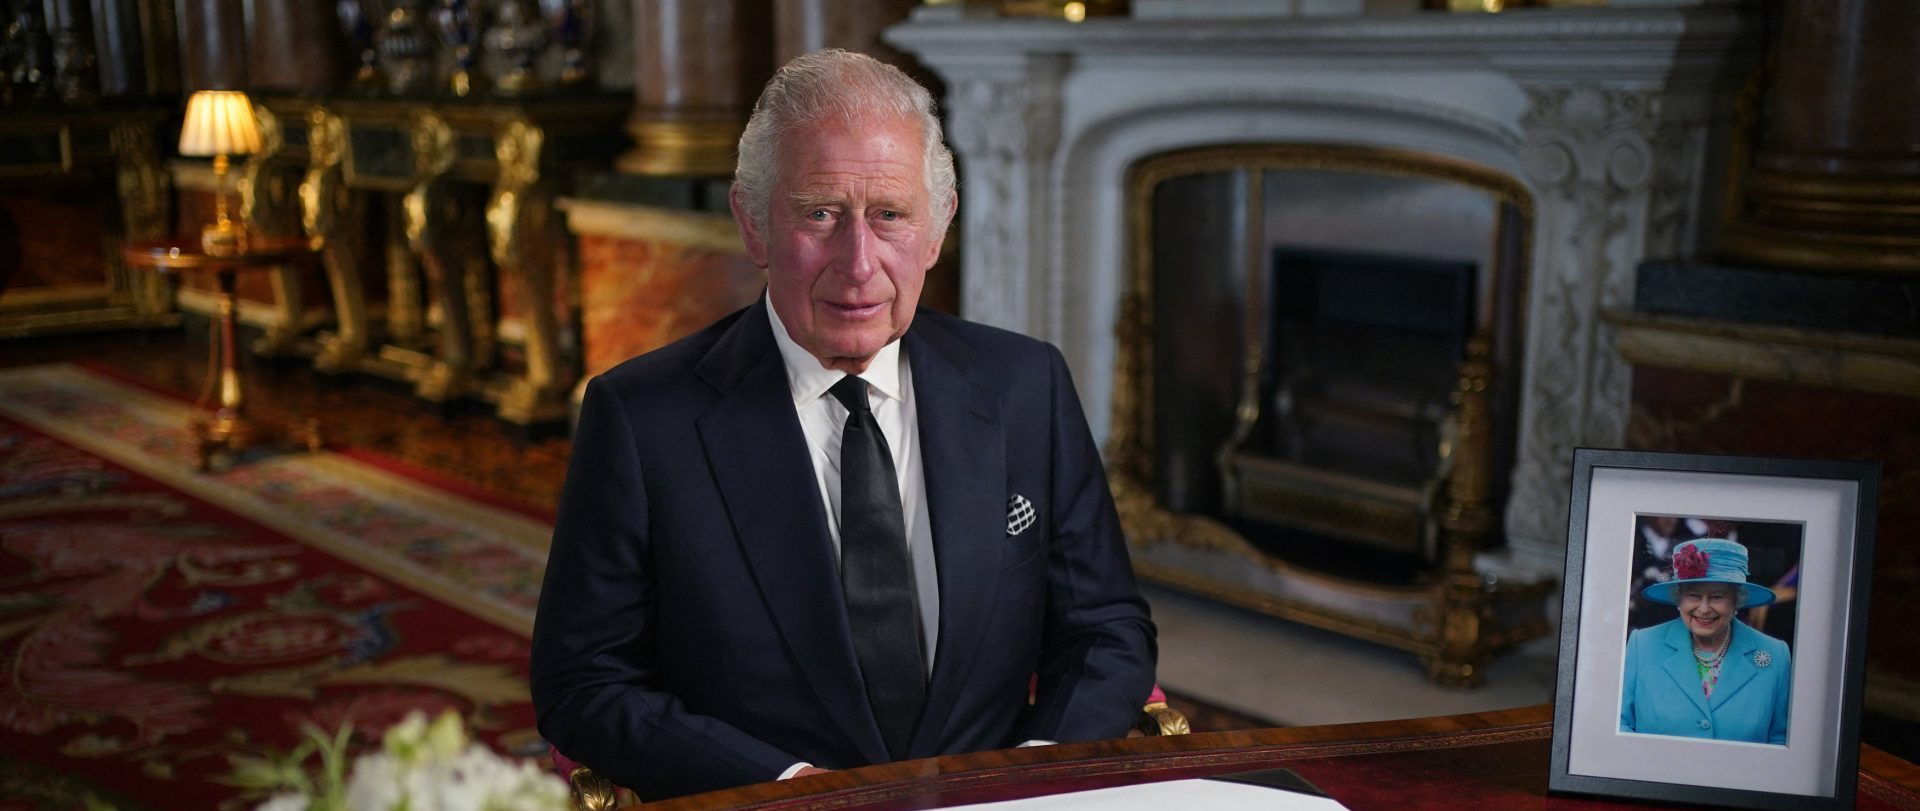 King Charles III Addresses The Nation For The First Time Following The Passing Of Queen Elizabeth II